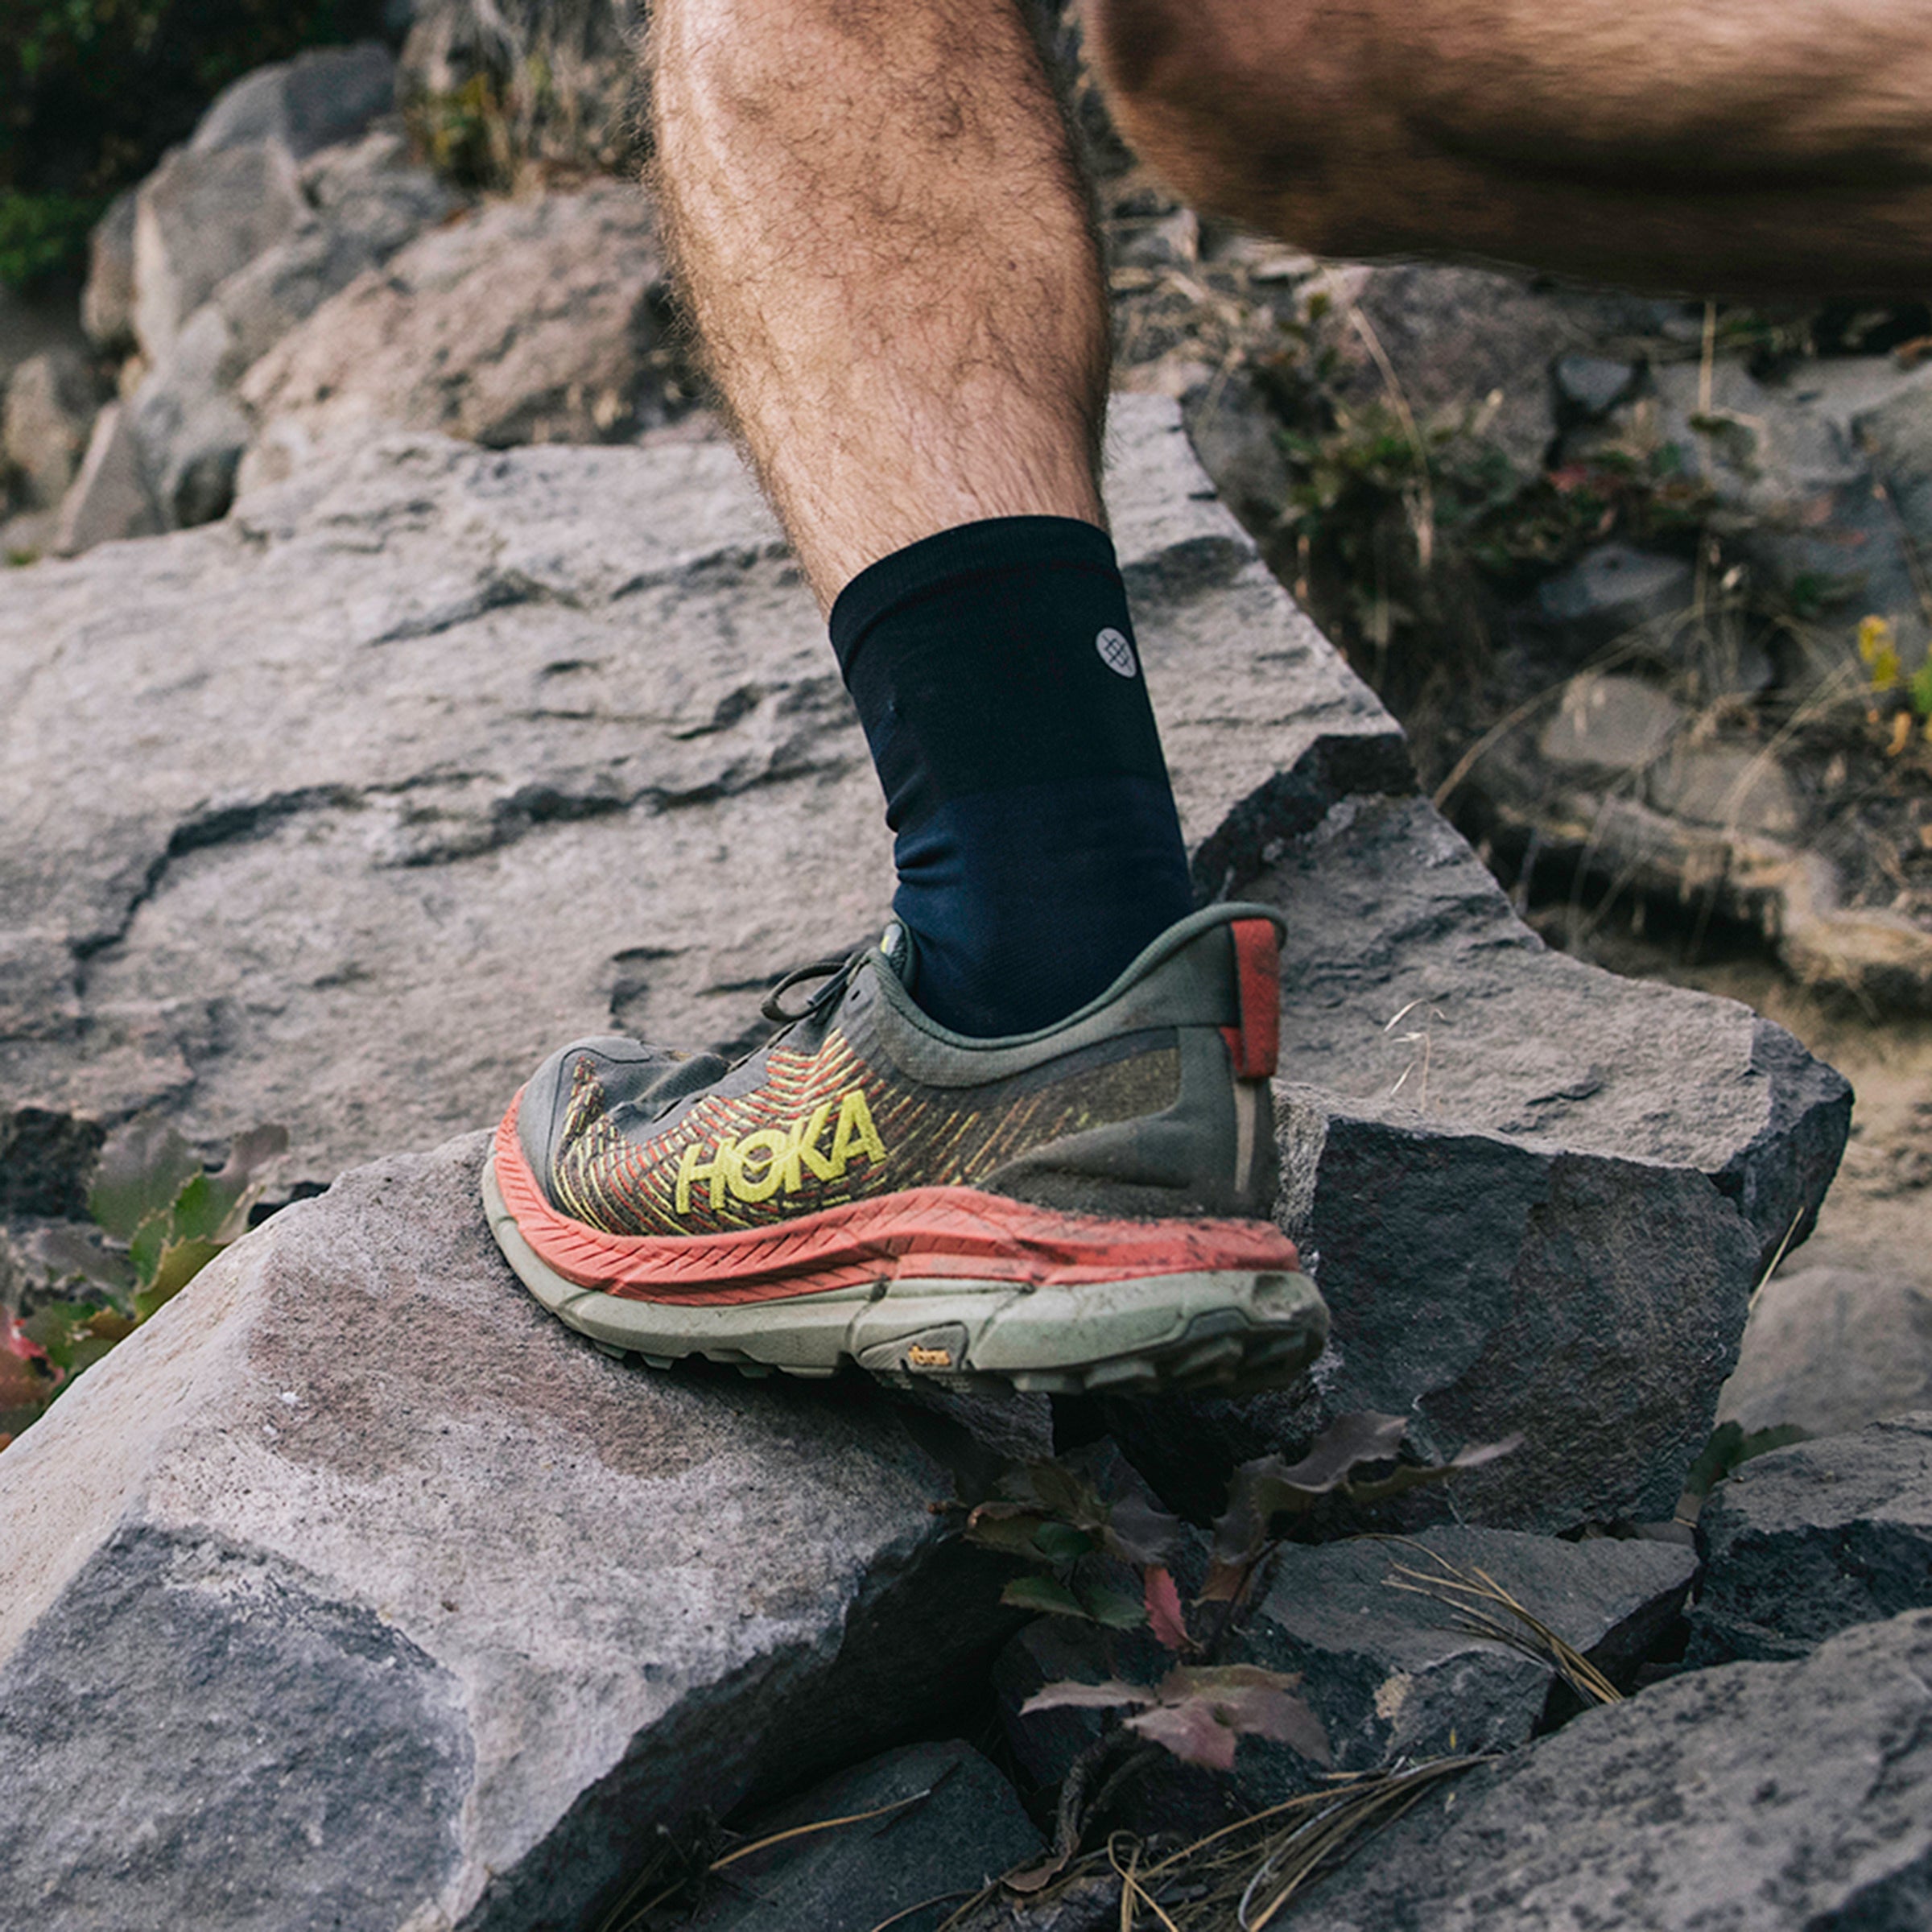 How This Hoka Trail Runner Became My Favorite Tackle-Anything Shoe